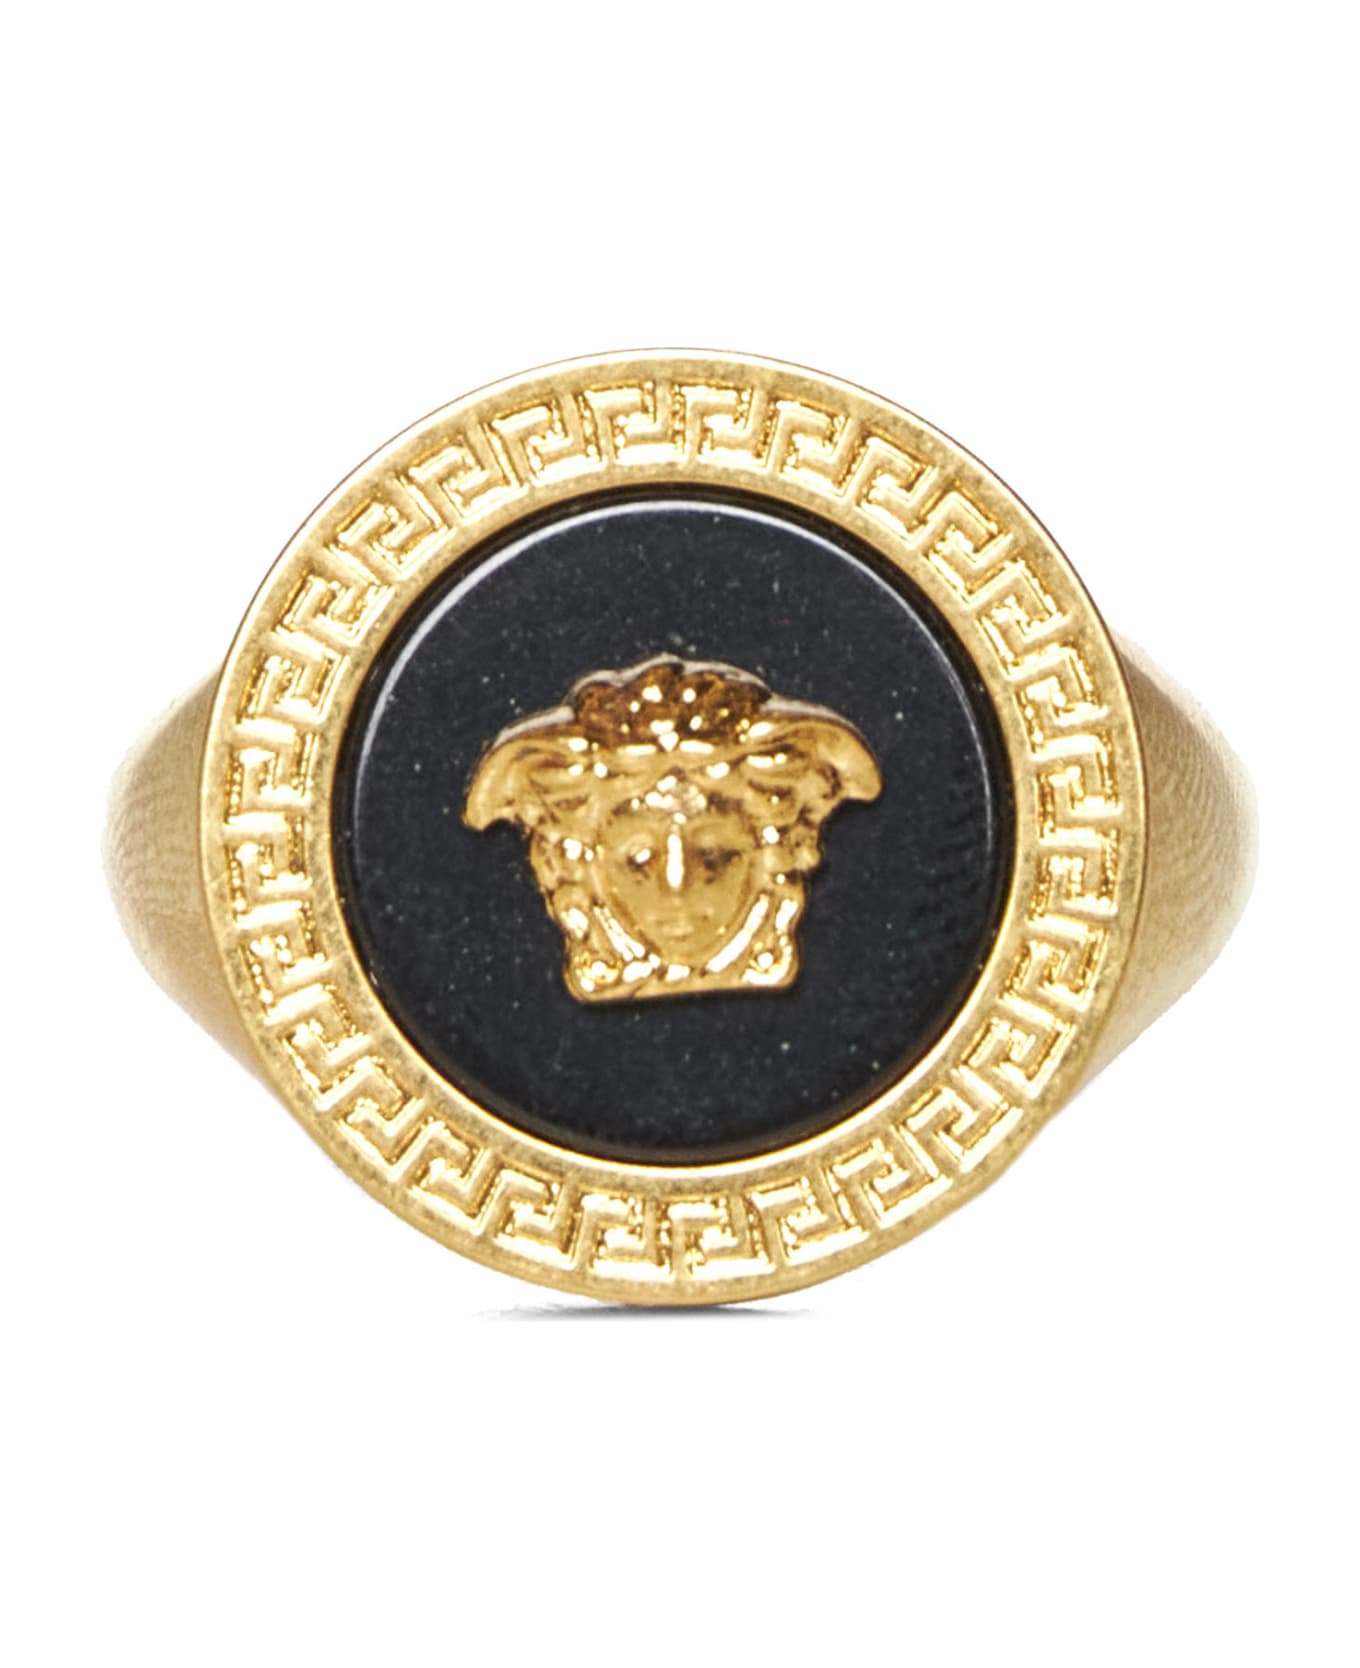 Versace Medusa Ring - At a glance